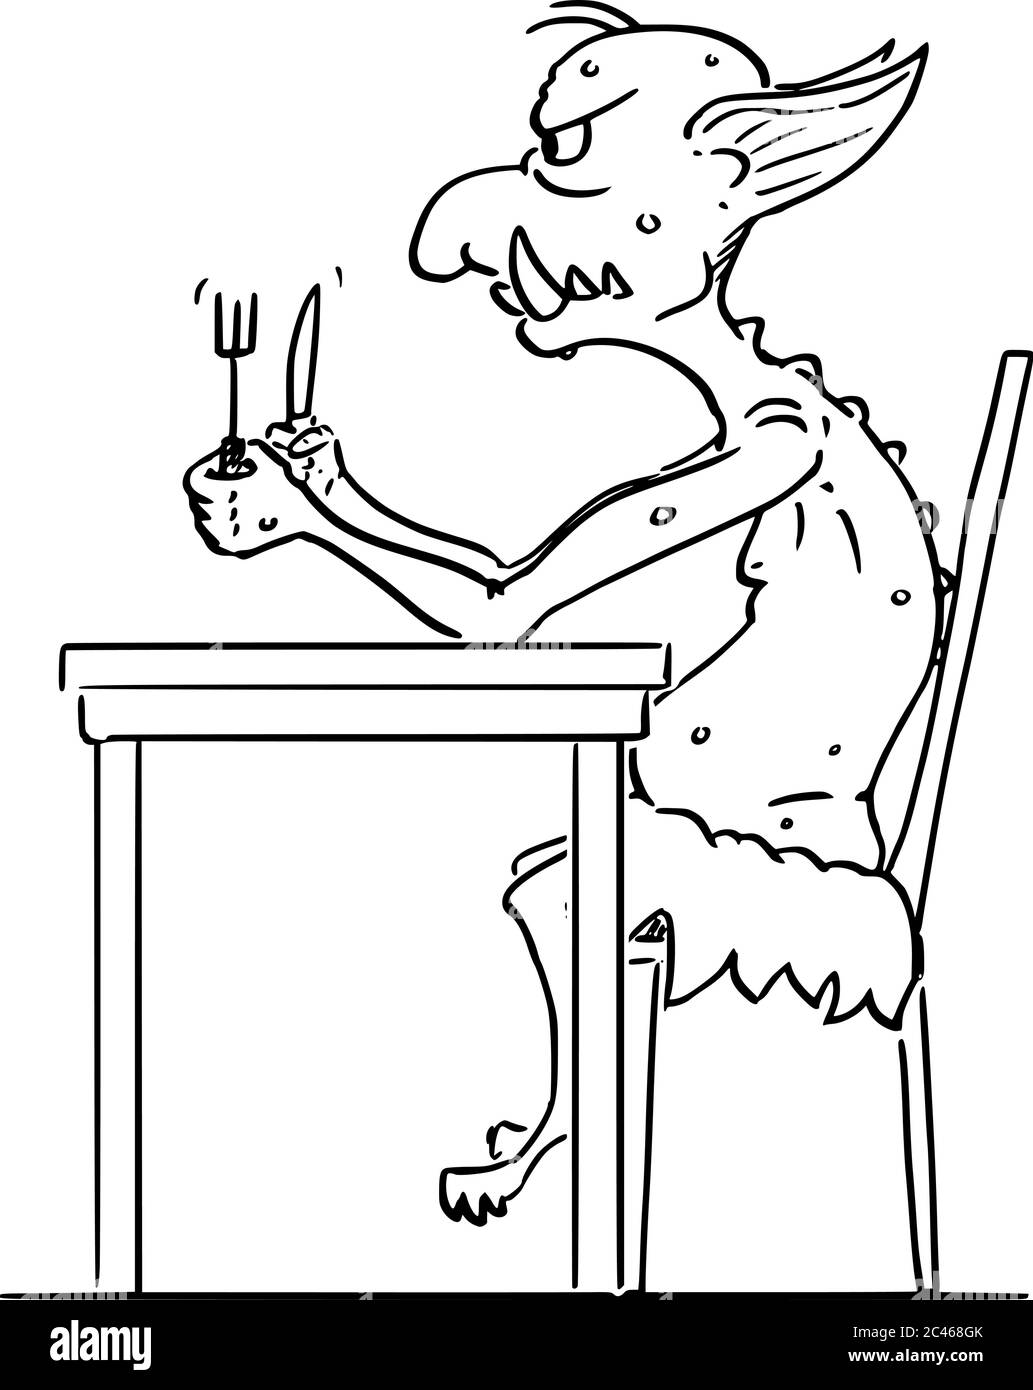 Vector cartoon stick figure drawing conceptual illustration of virtual Internet troll waiting for the food. Don't feed the troll. Stock Vector